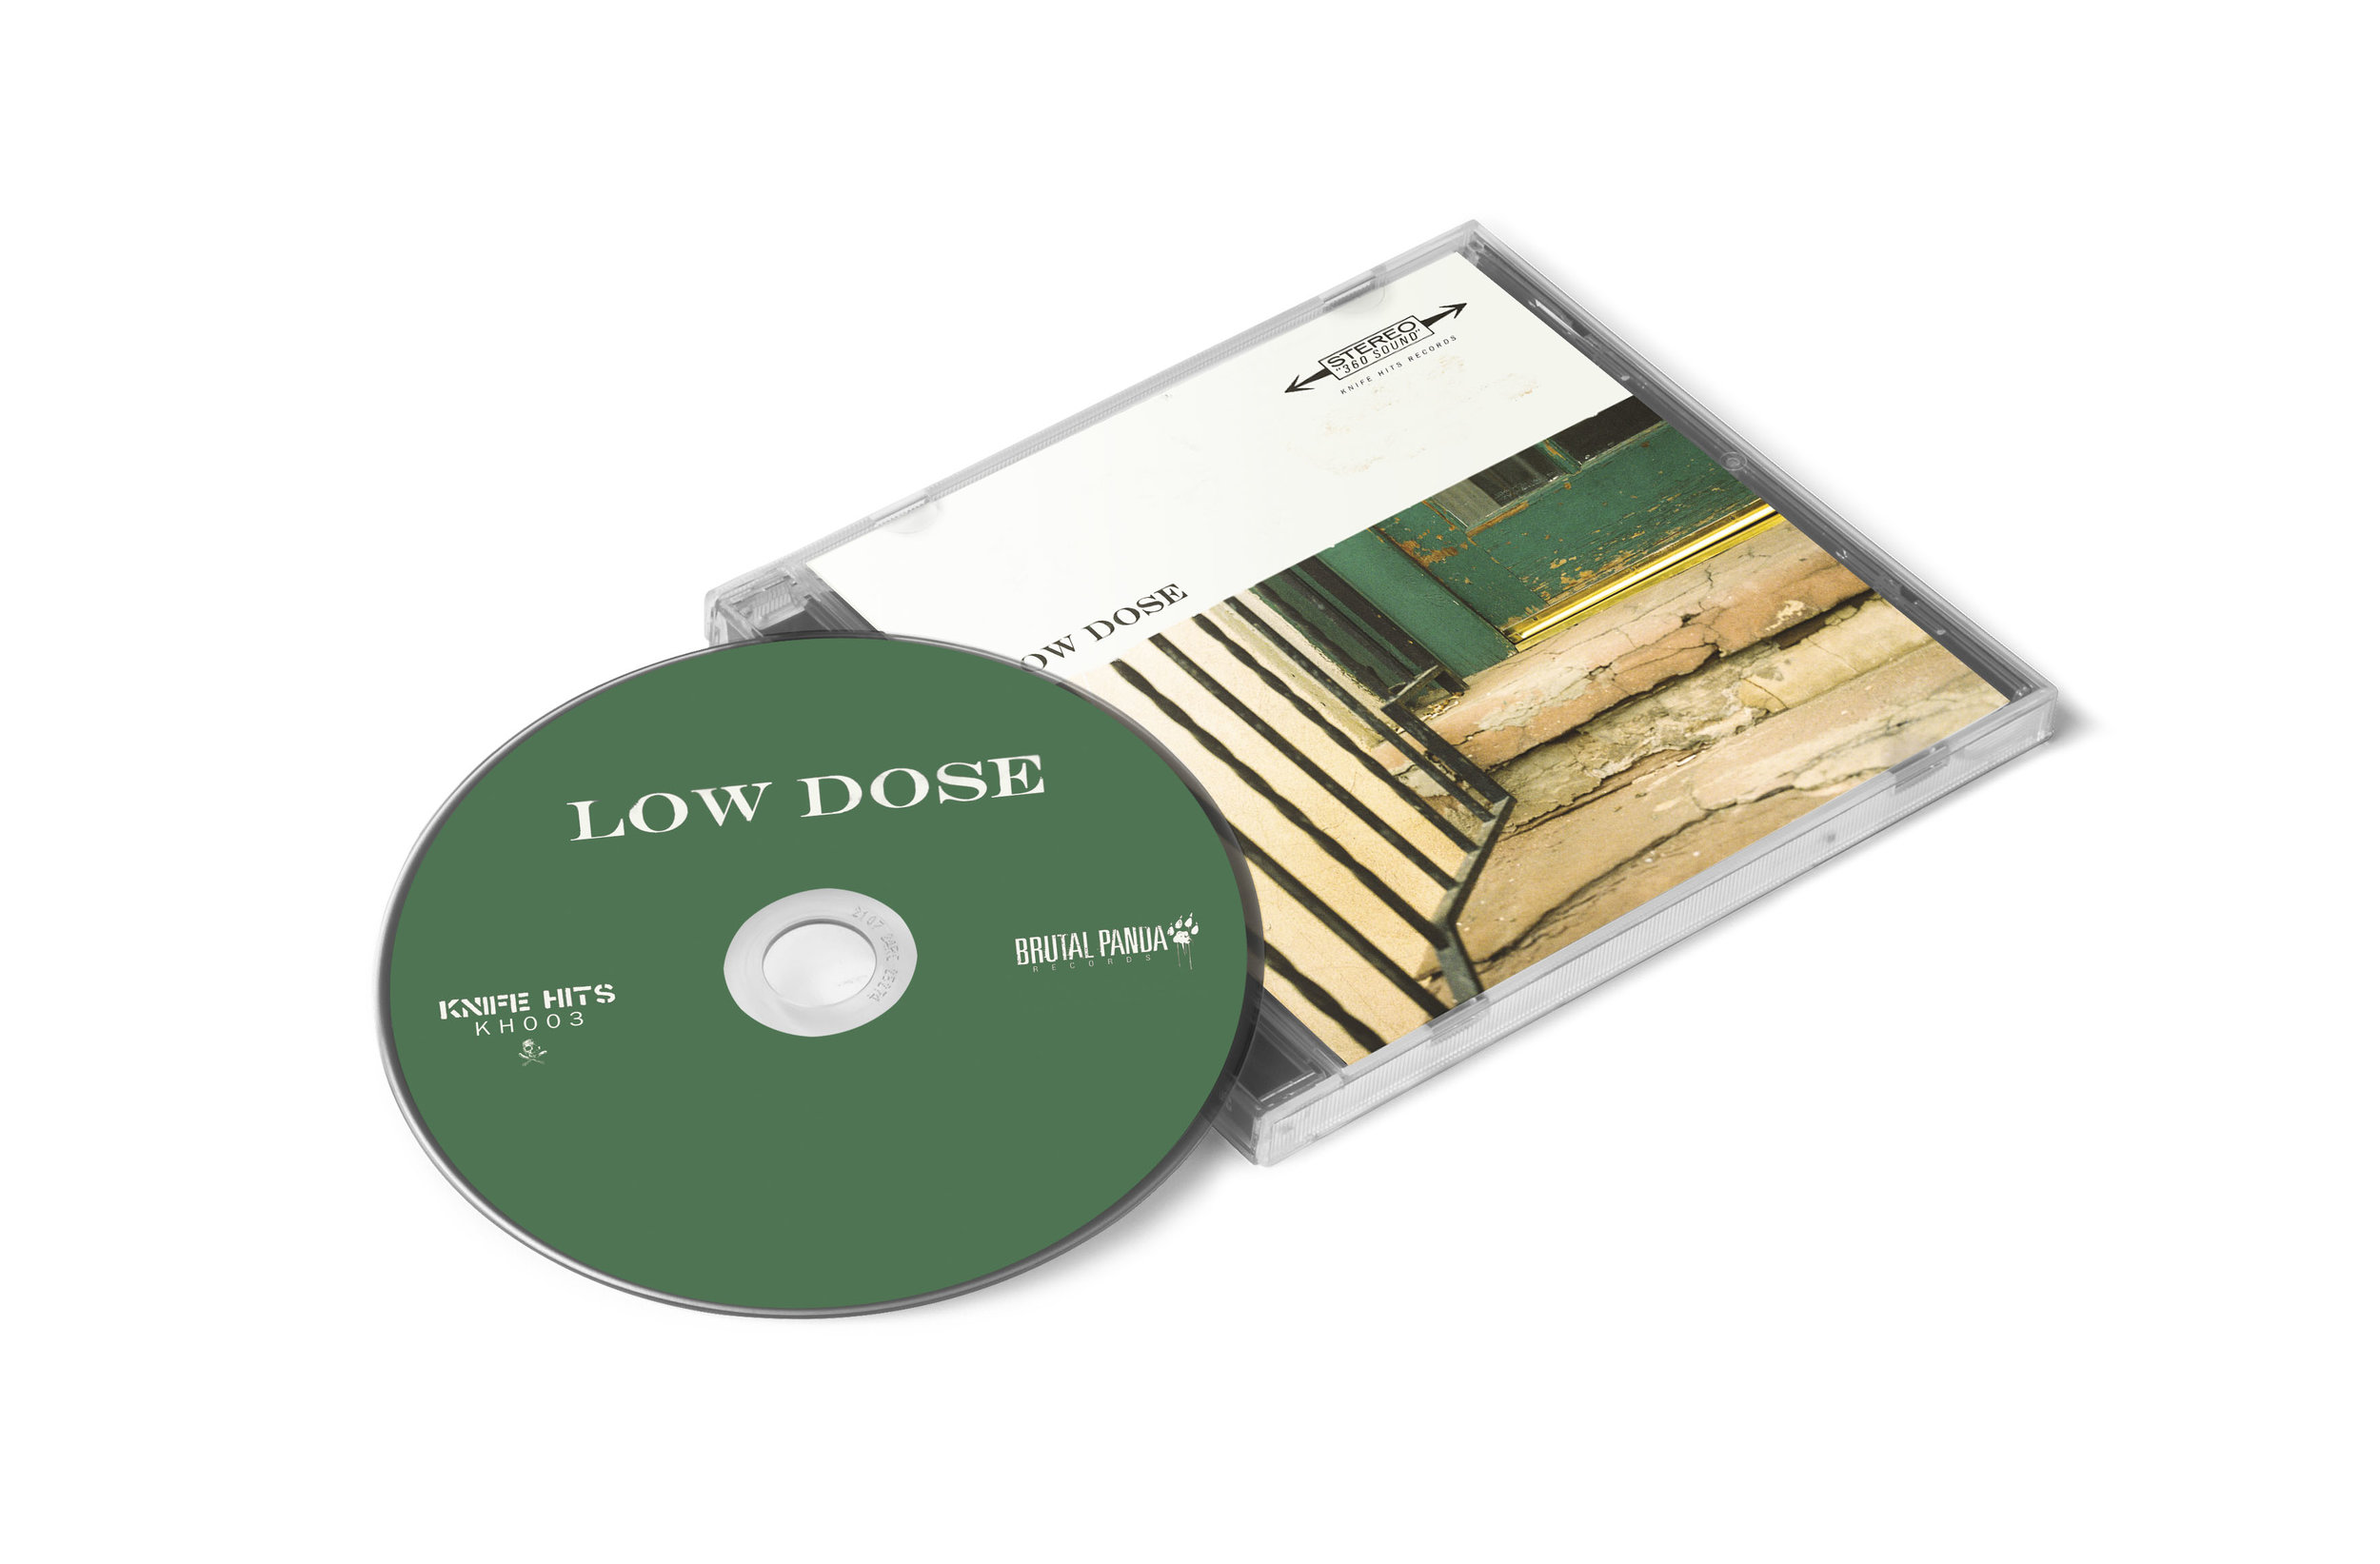 Low Dose - Low Dose compact disc